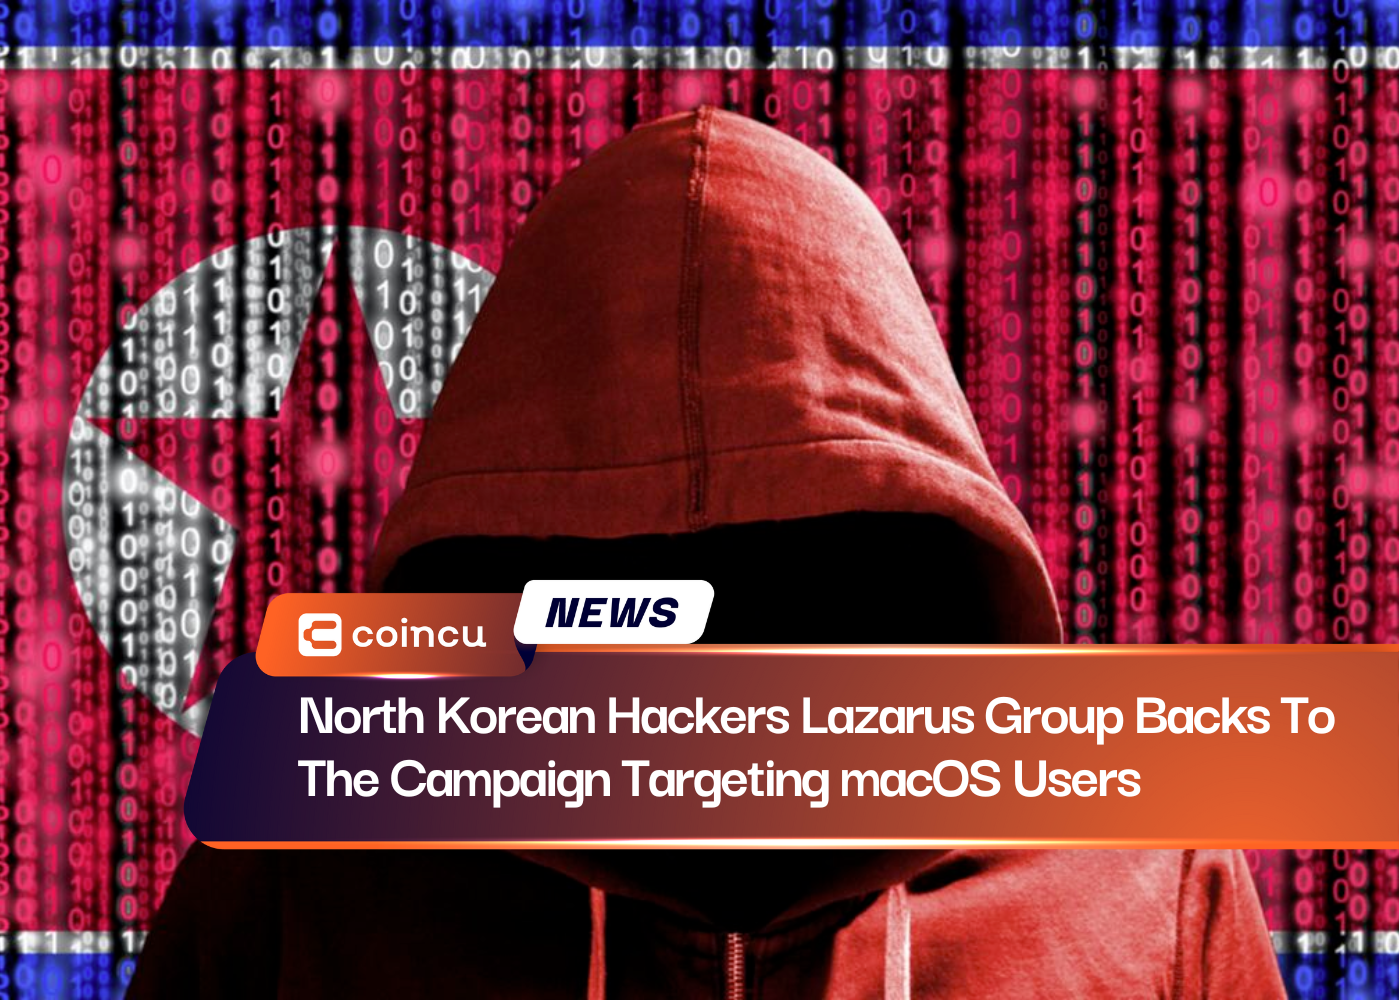 North Korean Hackers Lazarus Group Backs To The Campaign Targeting macOS Users